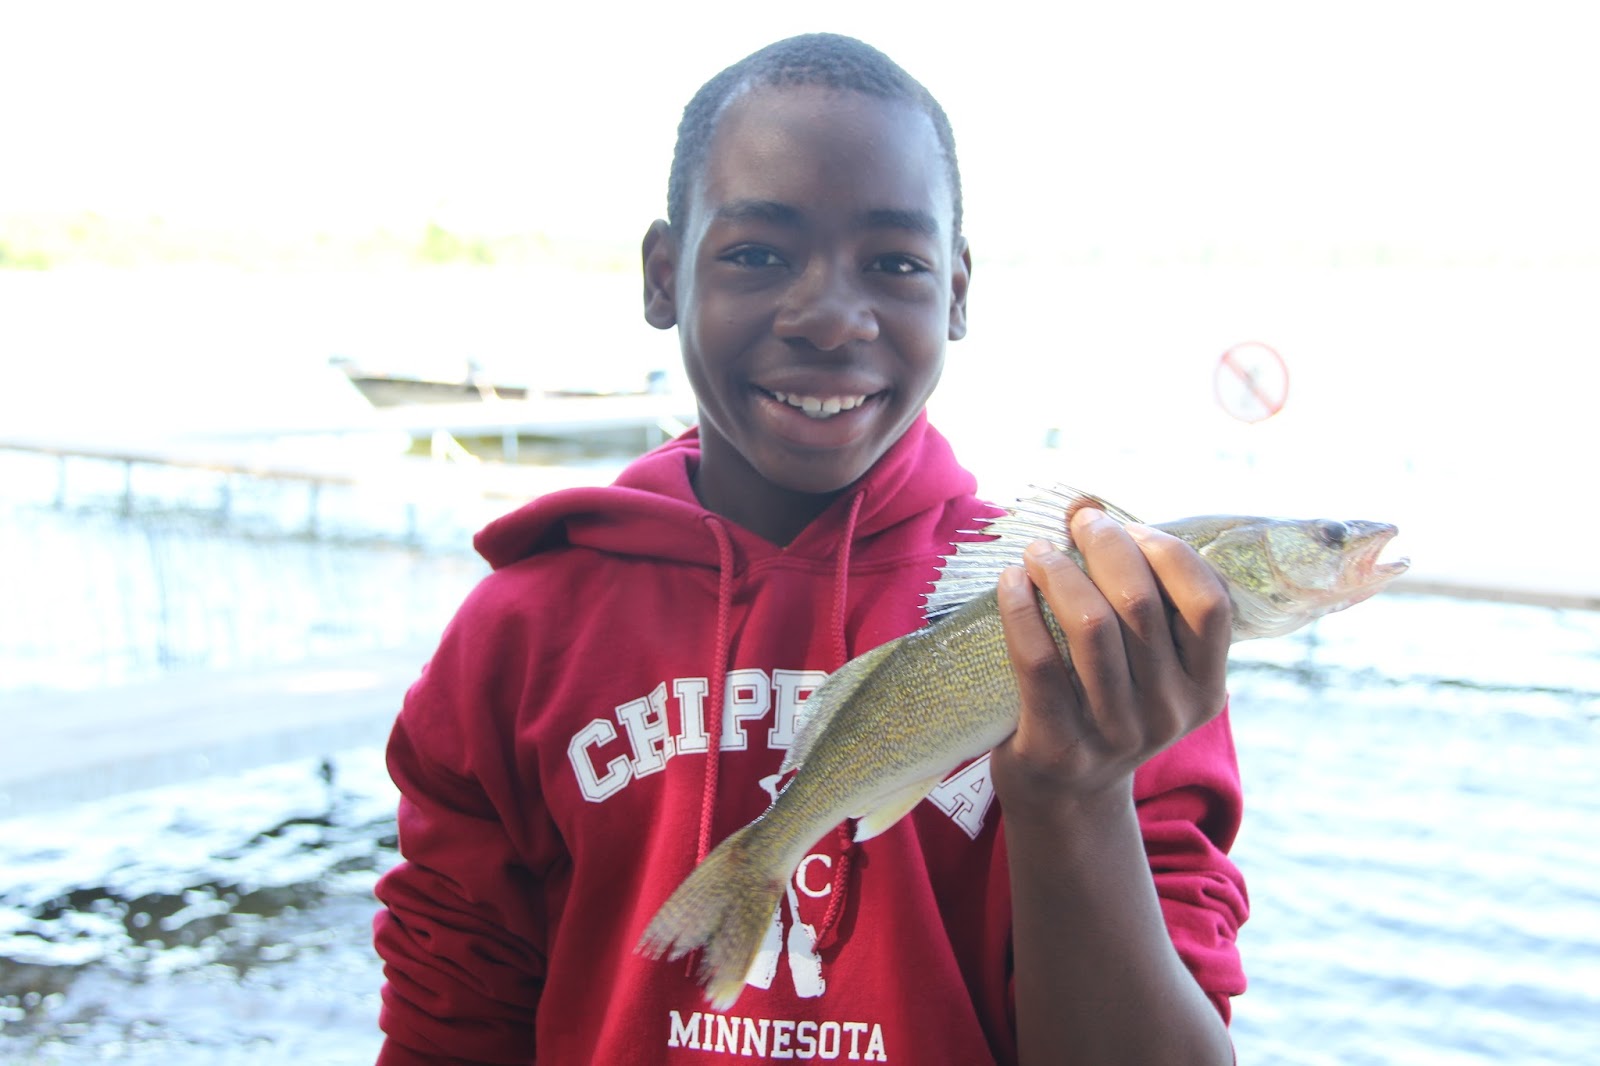 Camp Chippewa for Boys: And Camp Goes On!